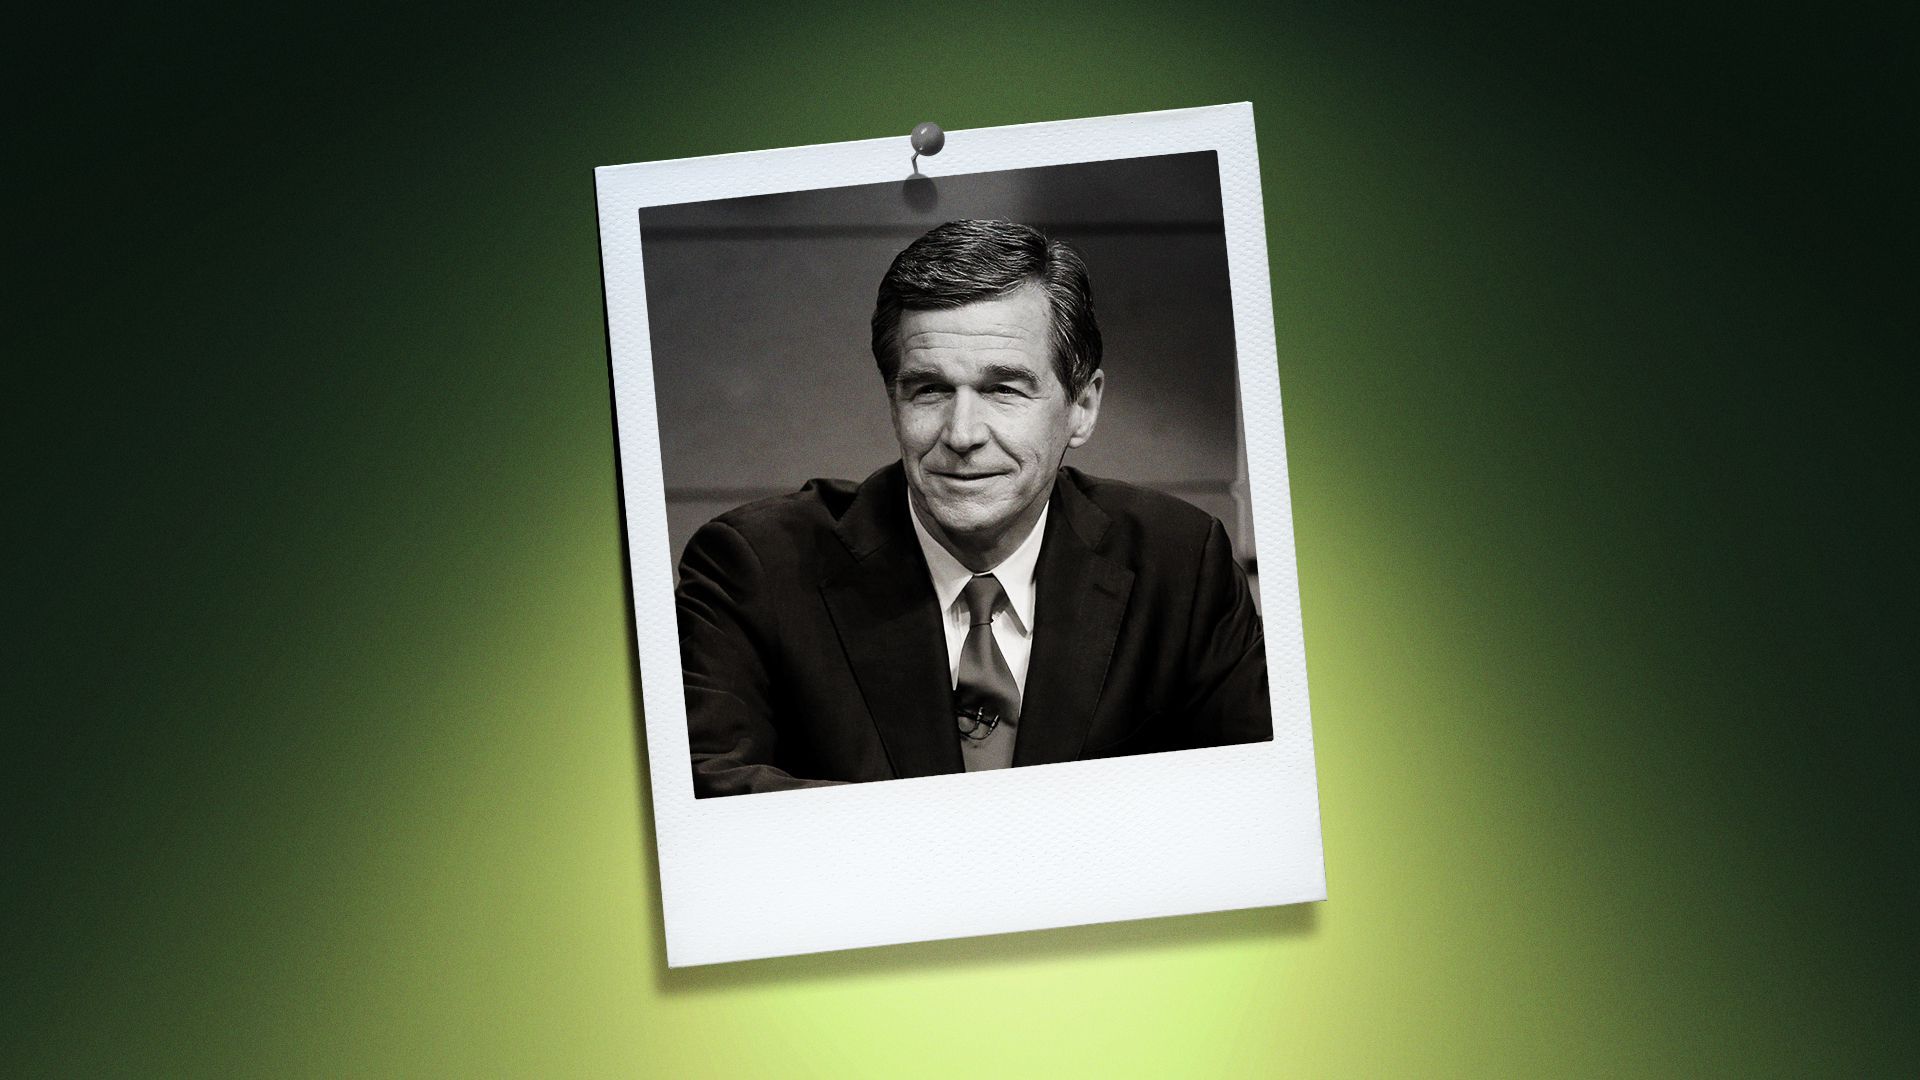 Photo illustration of Roy Cooper in the center of a Polaroid photo under a green spotlight.